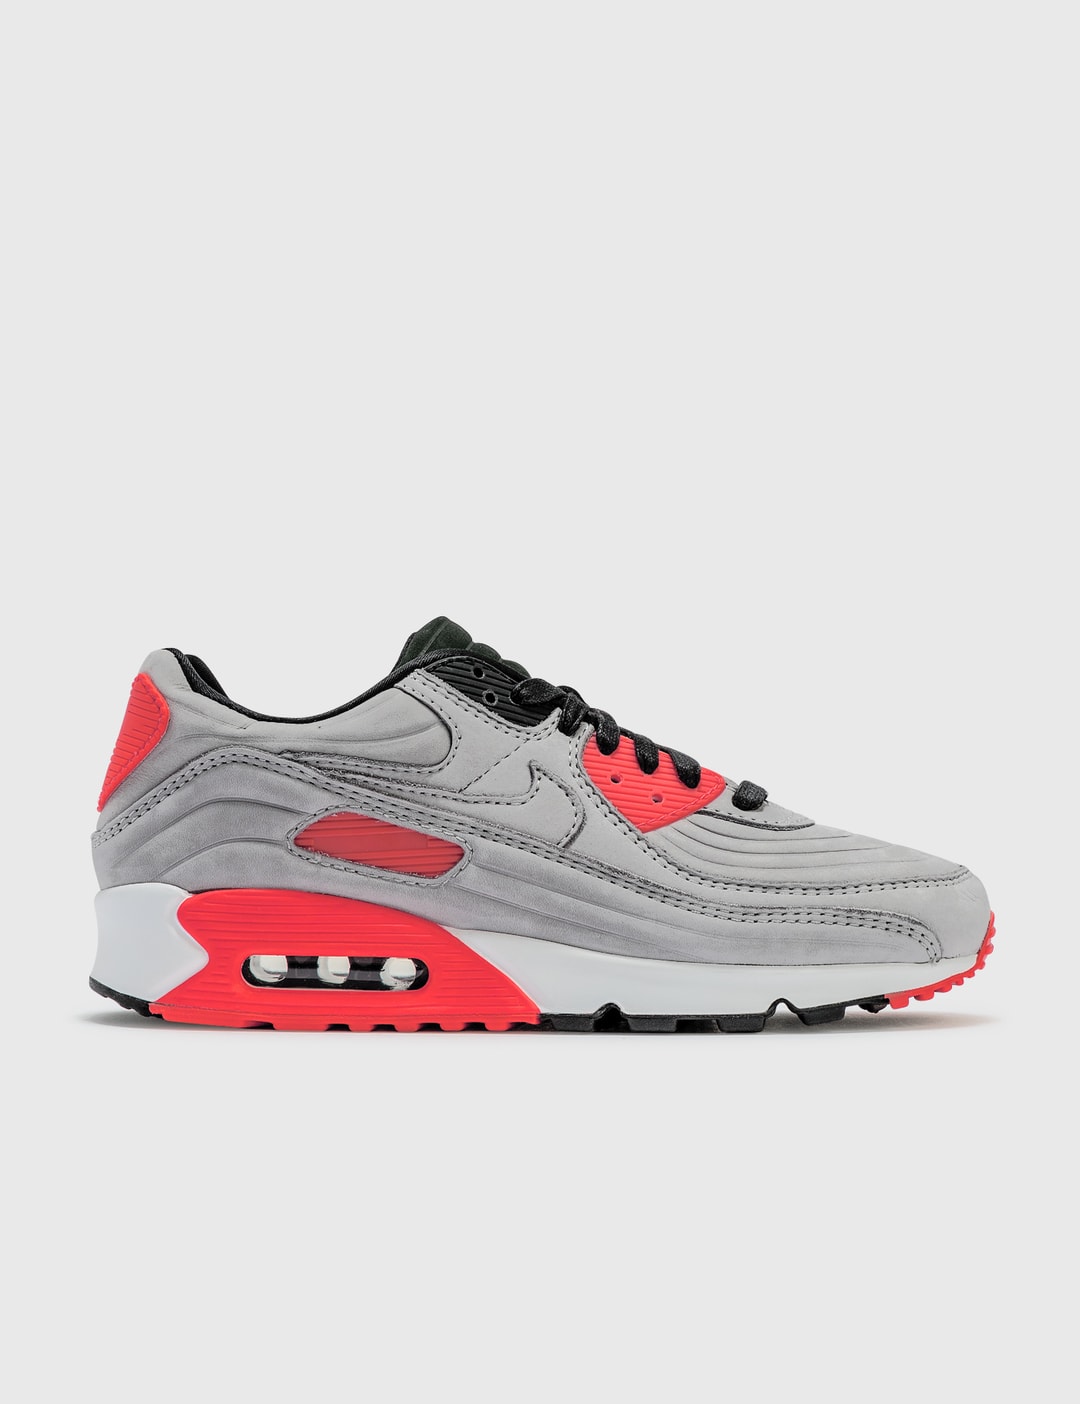 Tochi boom lint Beangstigend Nike - Nike Air Max 90 QS | HBX - Globally Curated Fashion and Lifestyle by  Hypebeast